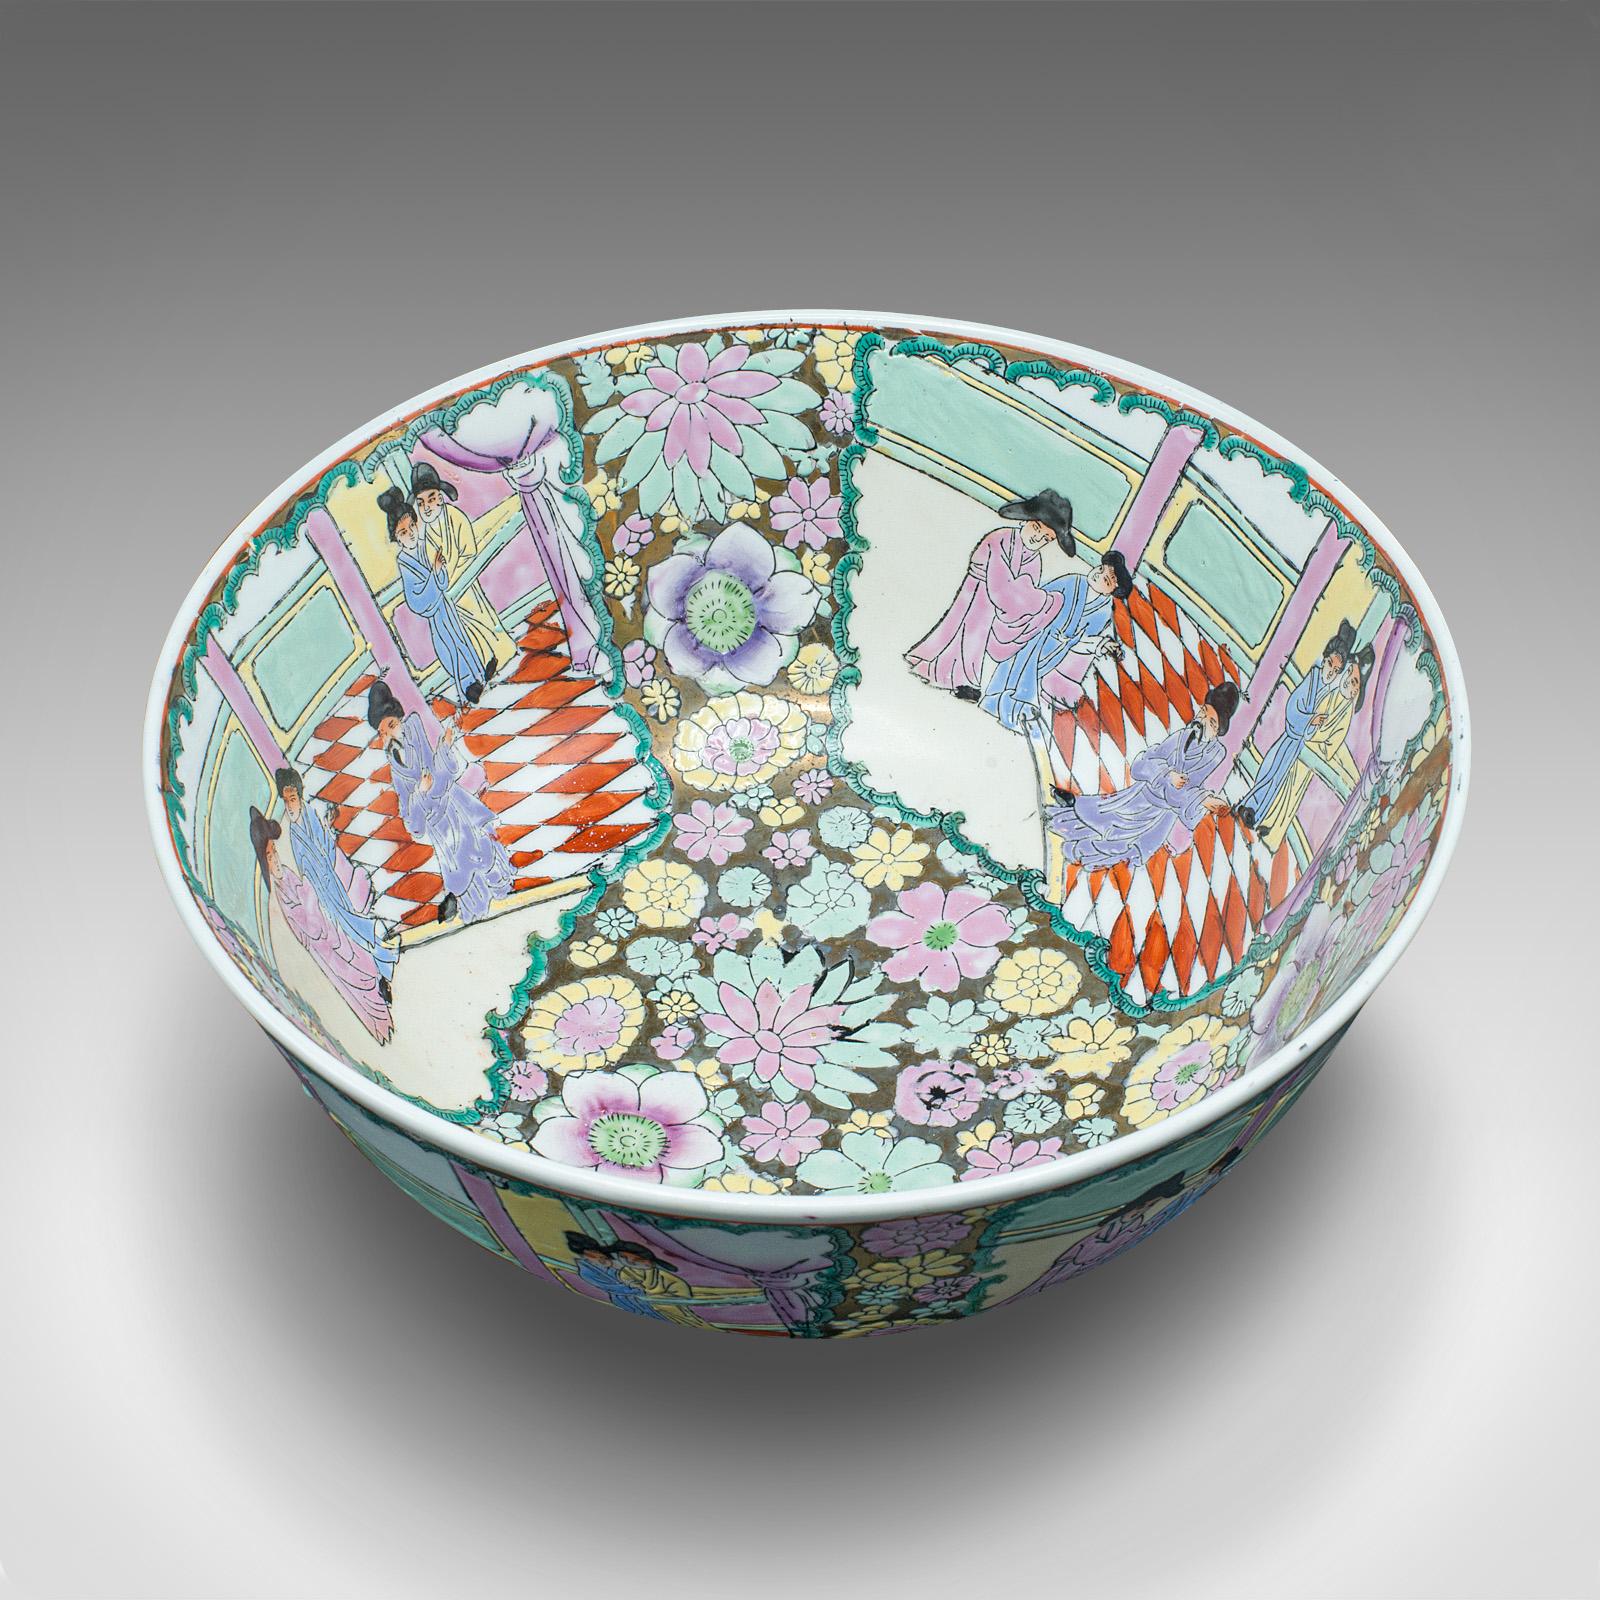 Antique Decorative Bowl, Chinese, Ceramic Serving Dish, Qing Dynasty, Victorian For Sale 2